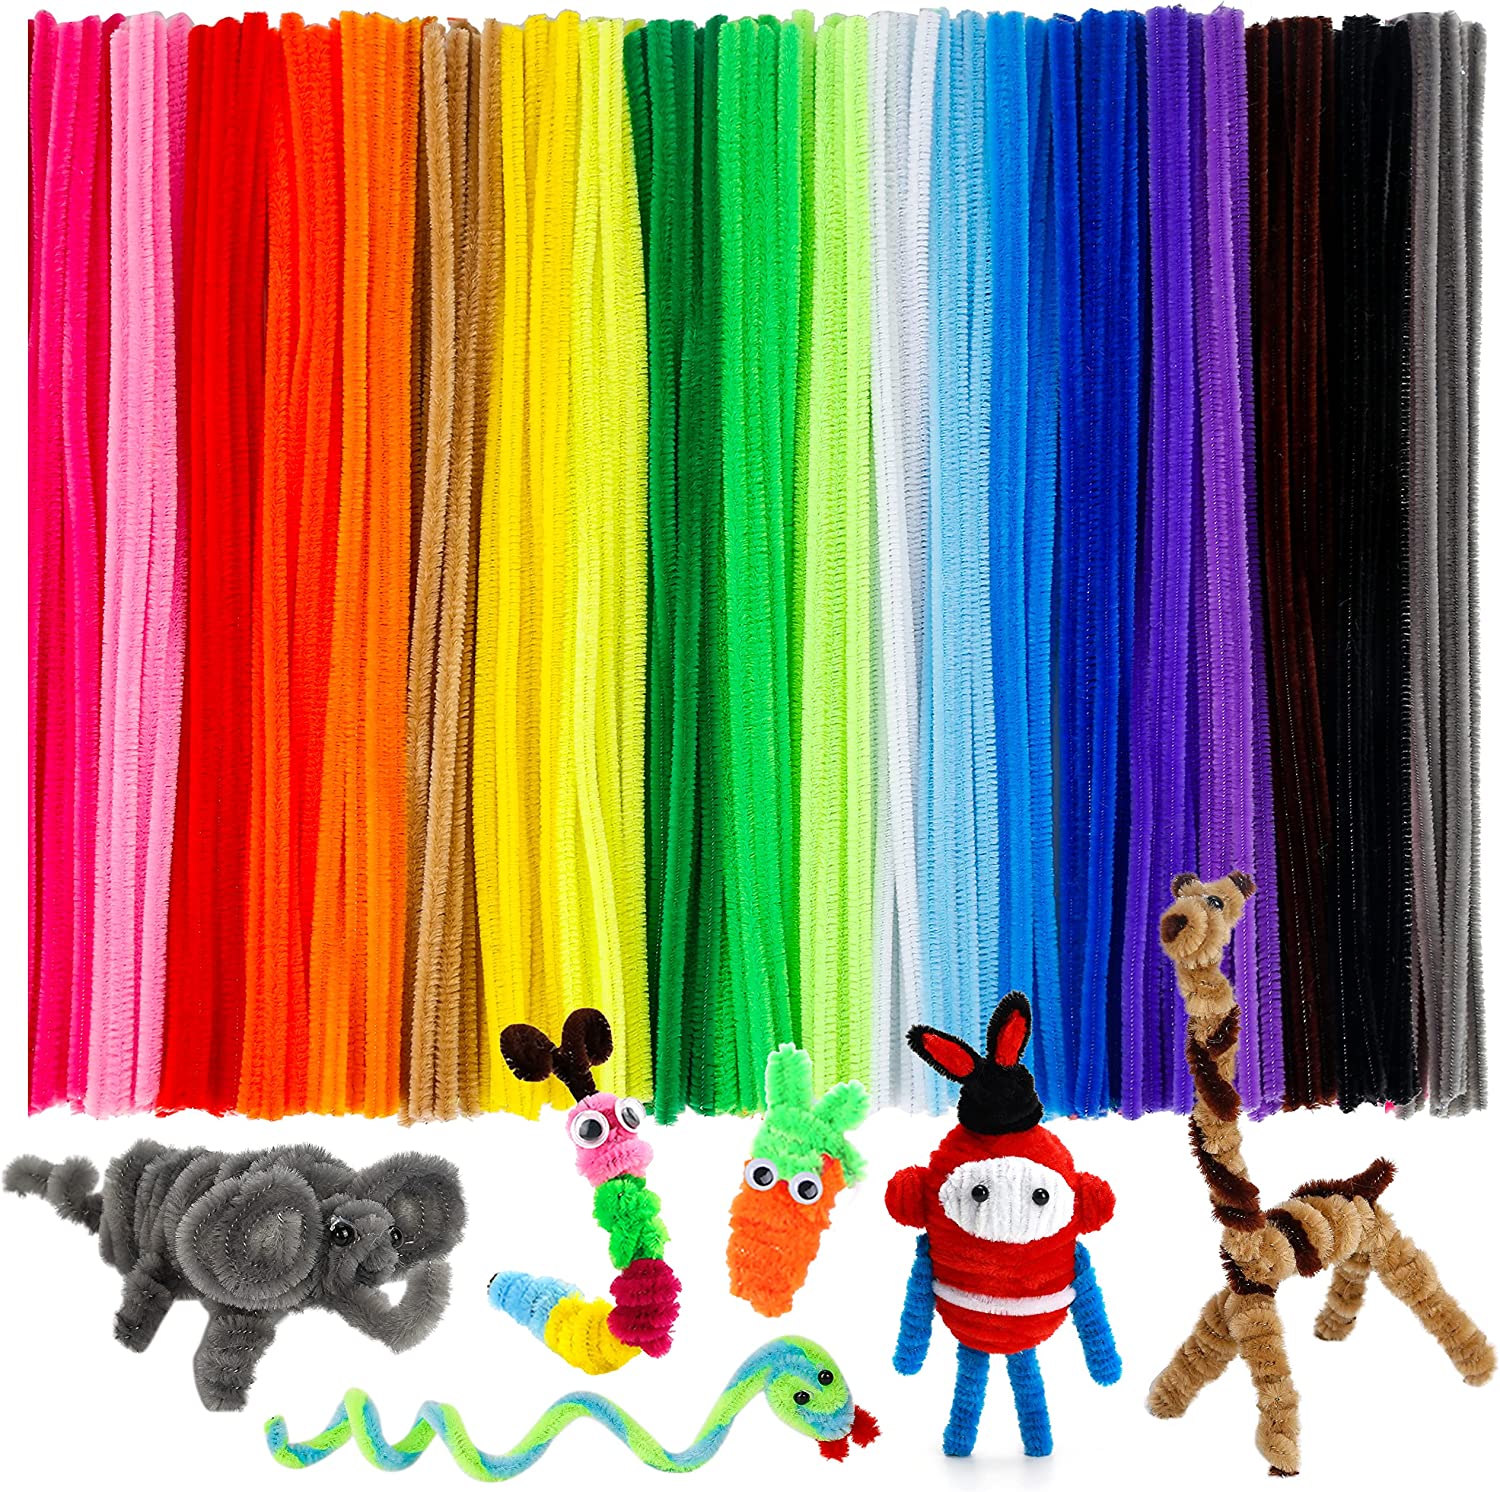 6mm Multi-Colored Pipe Cleaners Bulk Pack 12 Inches